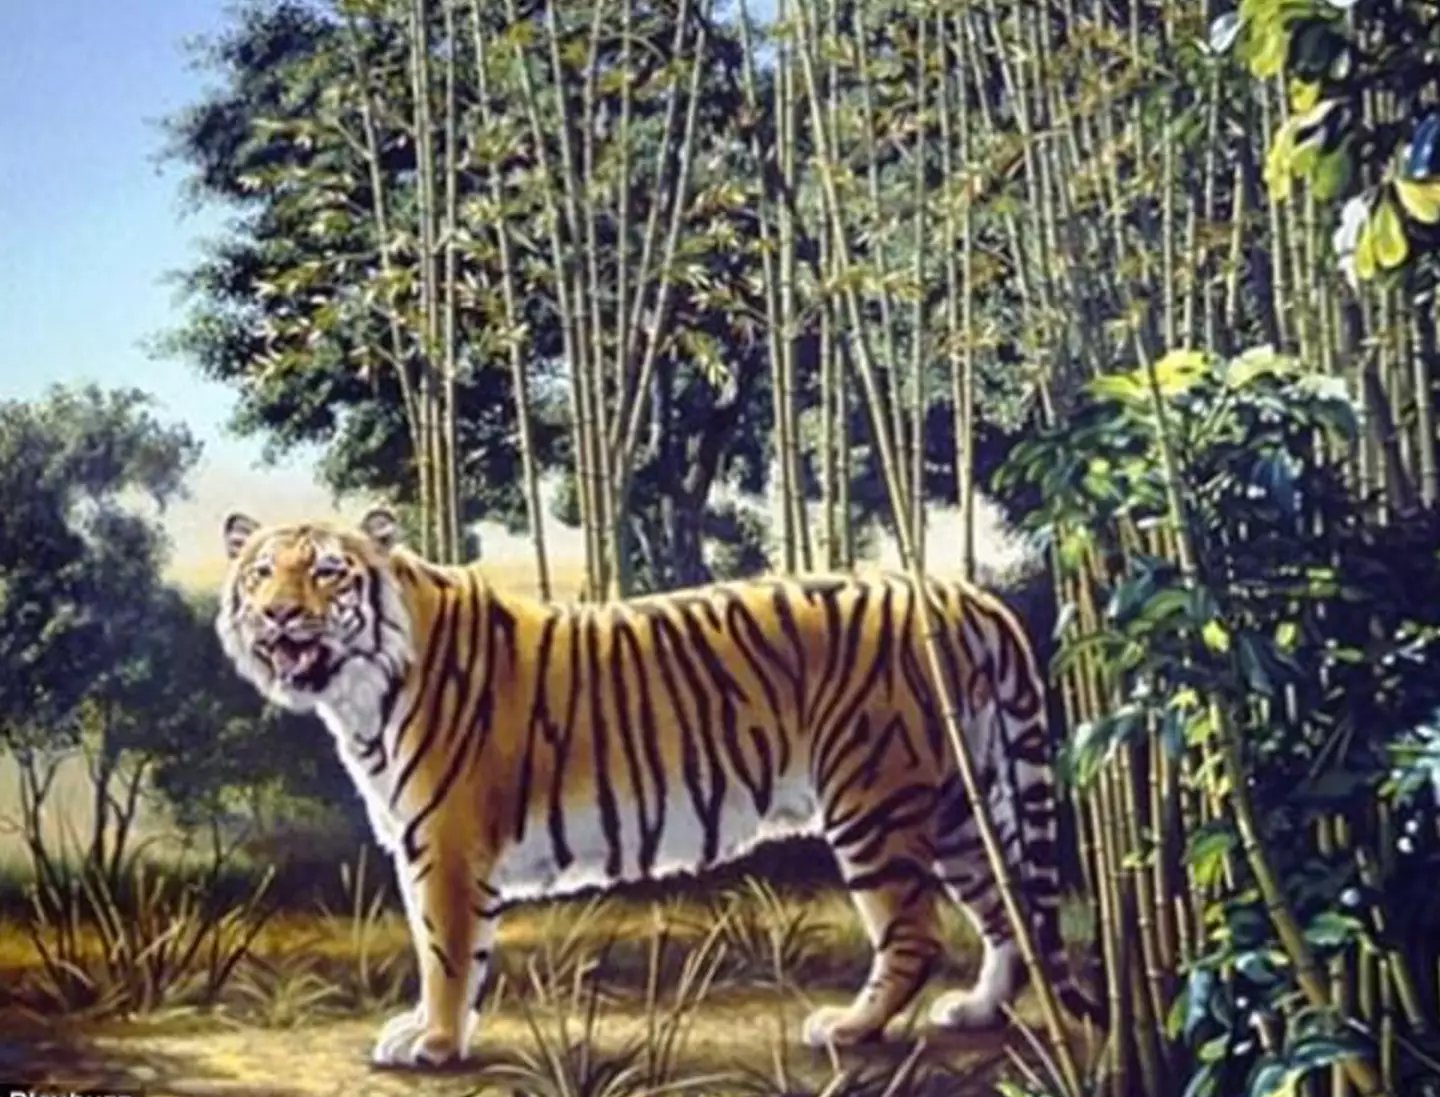 Get your eyeballs around this trippy tiger picture.